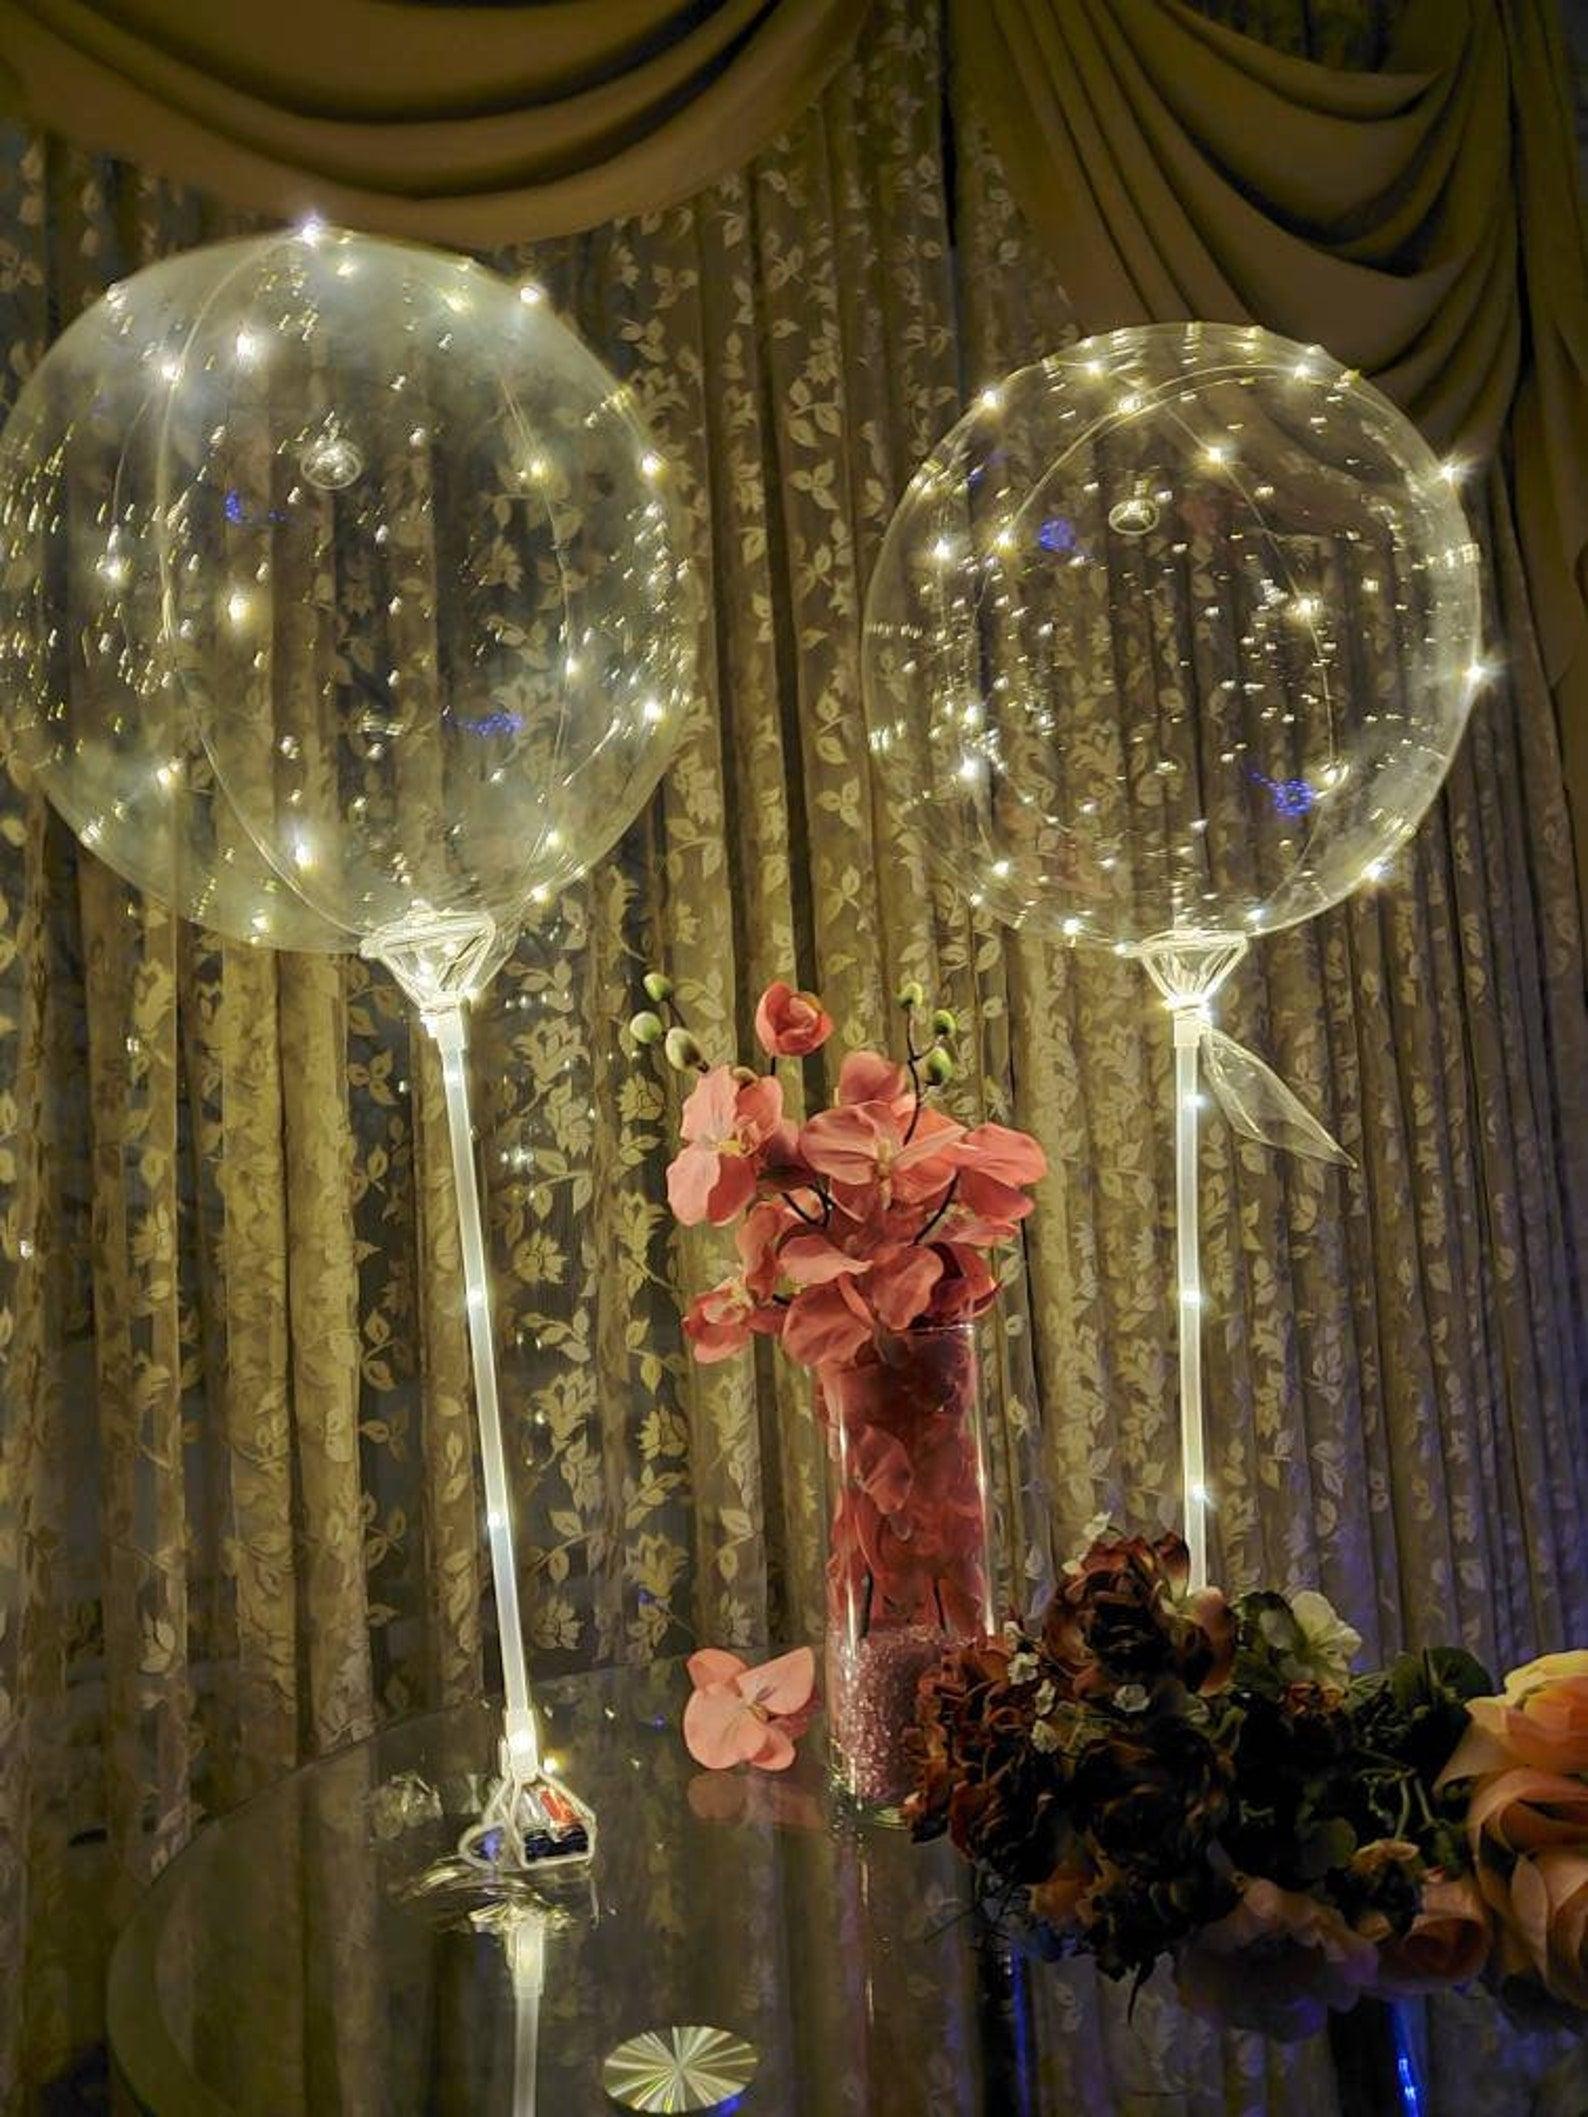 10 Pack LED Light Up Bobo Balloons Transparent Helium Glow Bubble Balloons  With String Lights For Party Birthday Wedding Decor